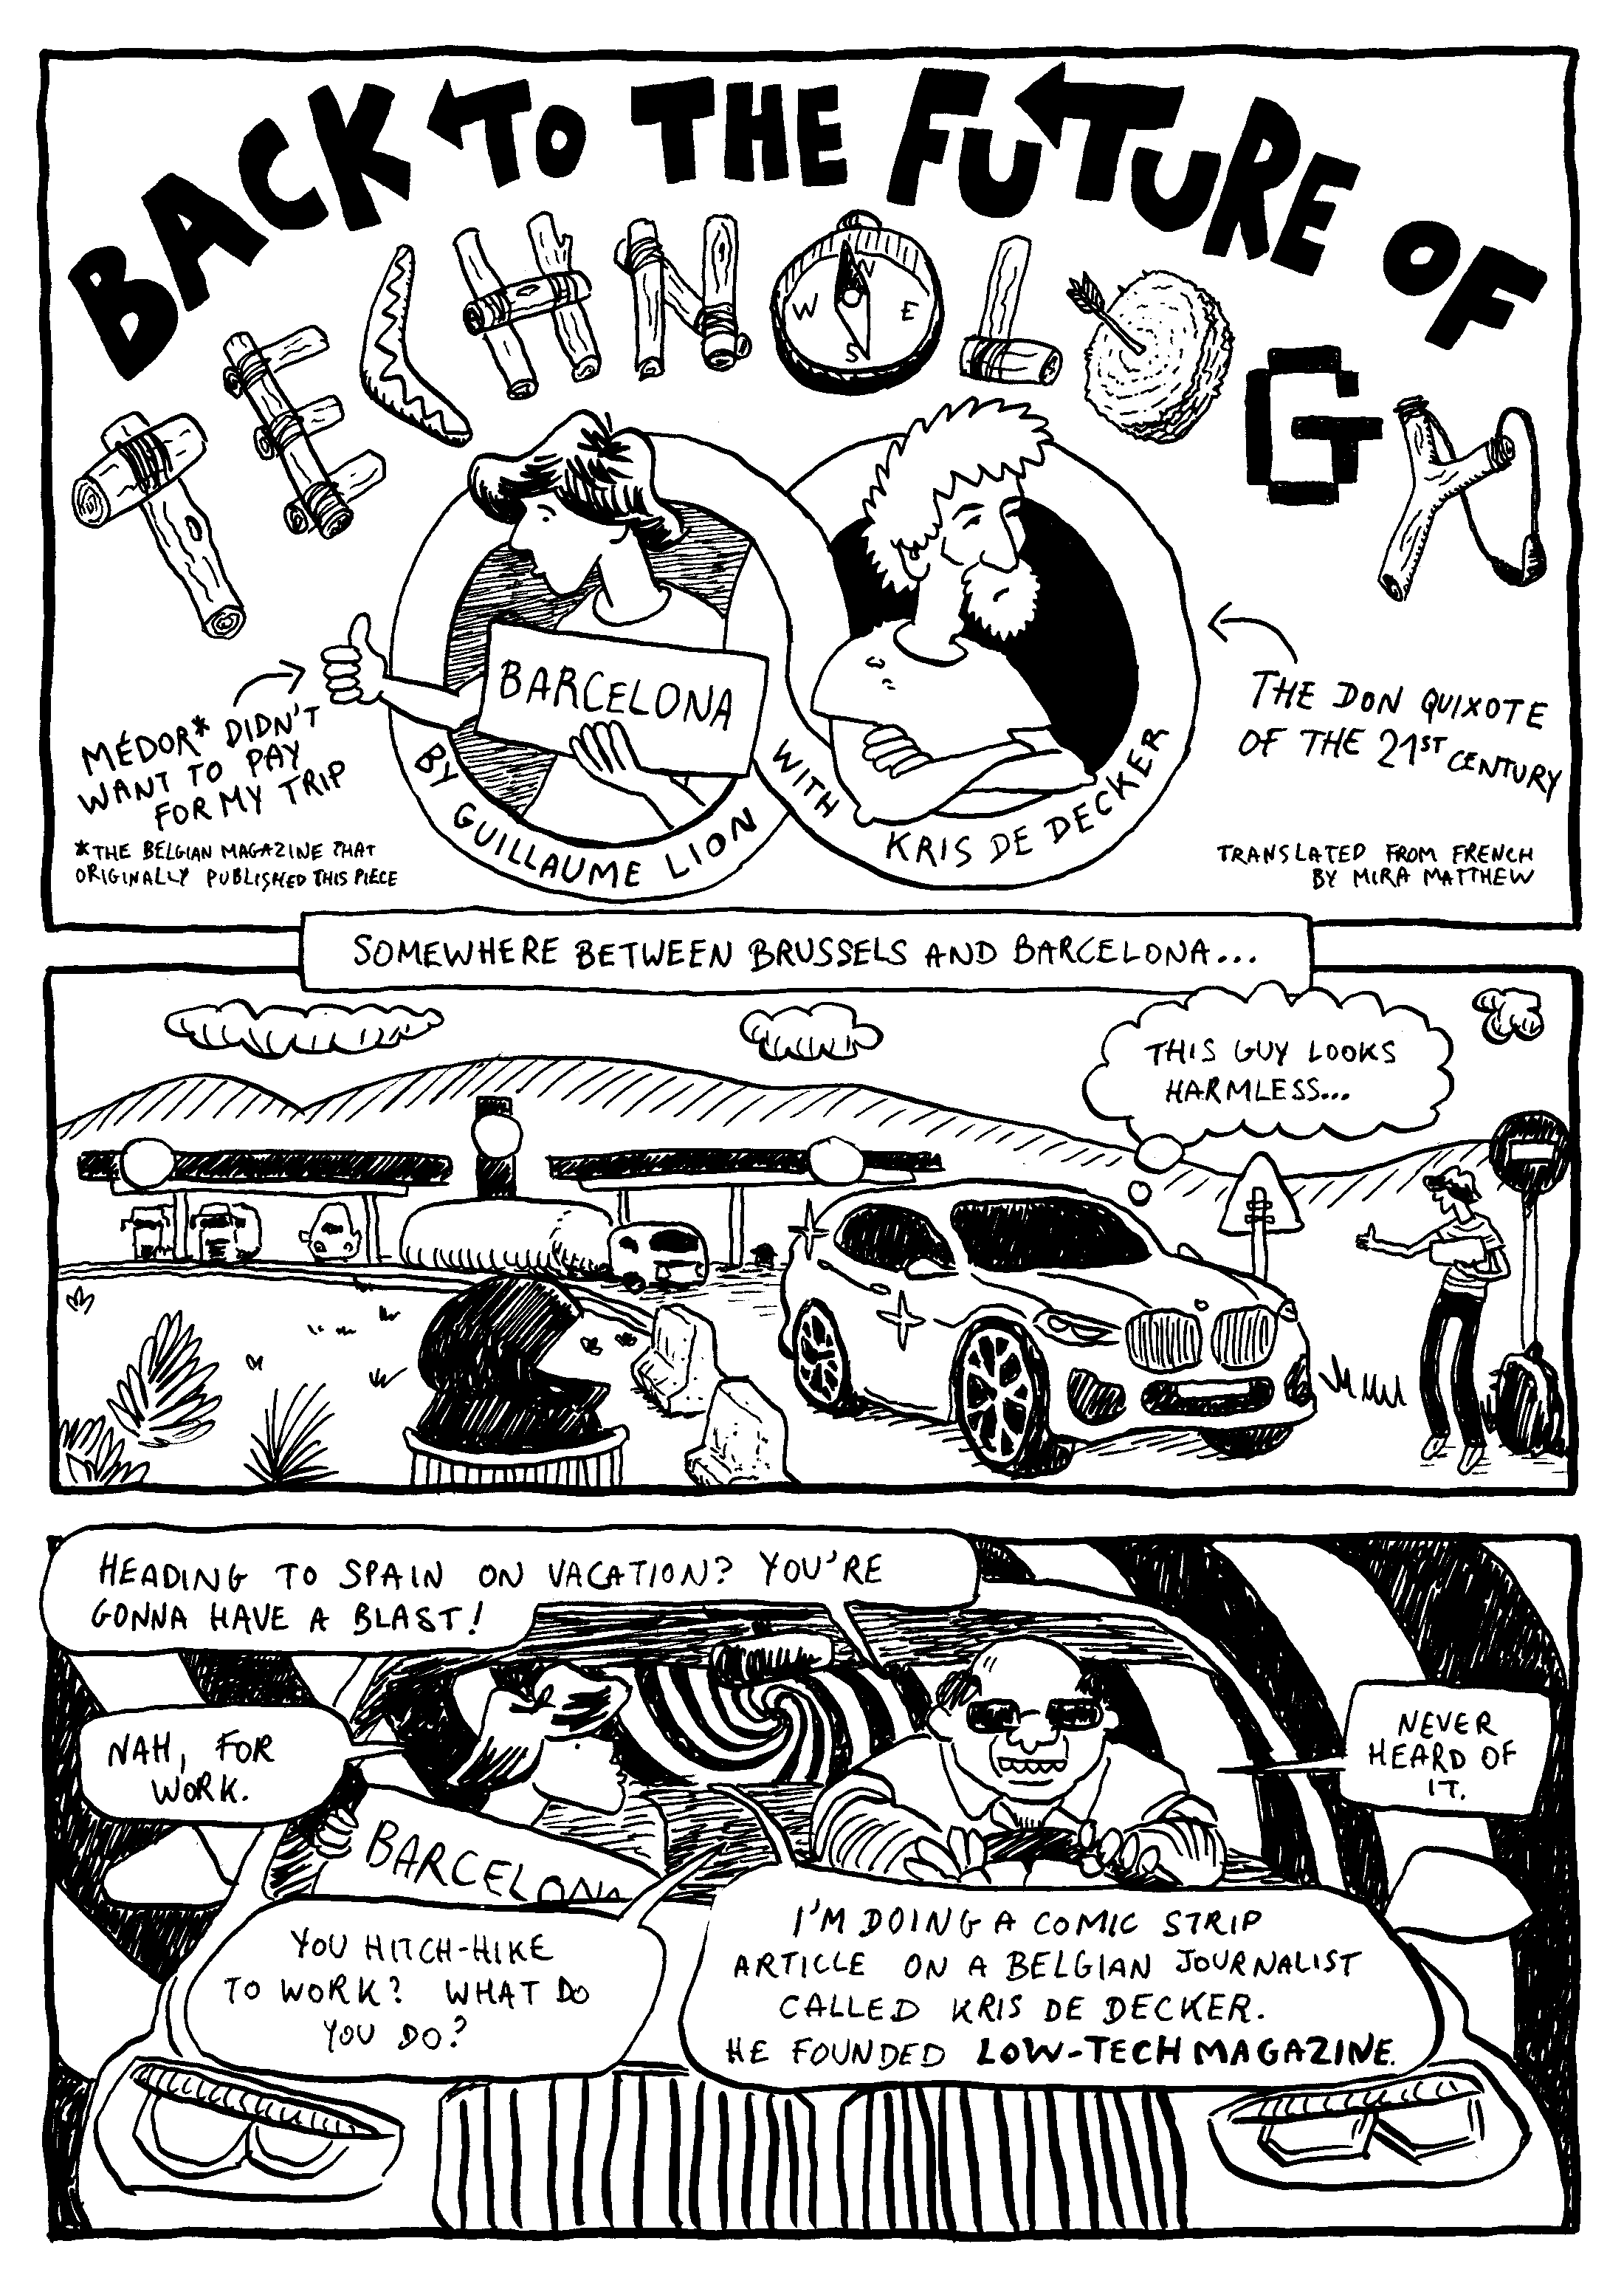 Page 1 of the Comic &ldquo;Back to the future of technology&rdquo; by Guillaume Lion